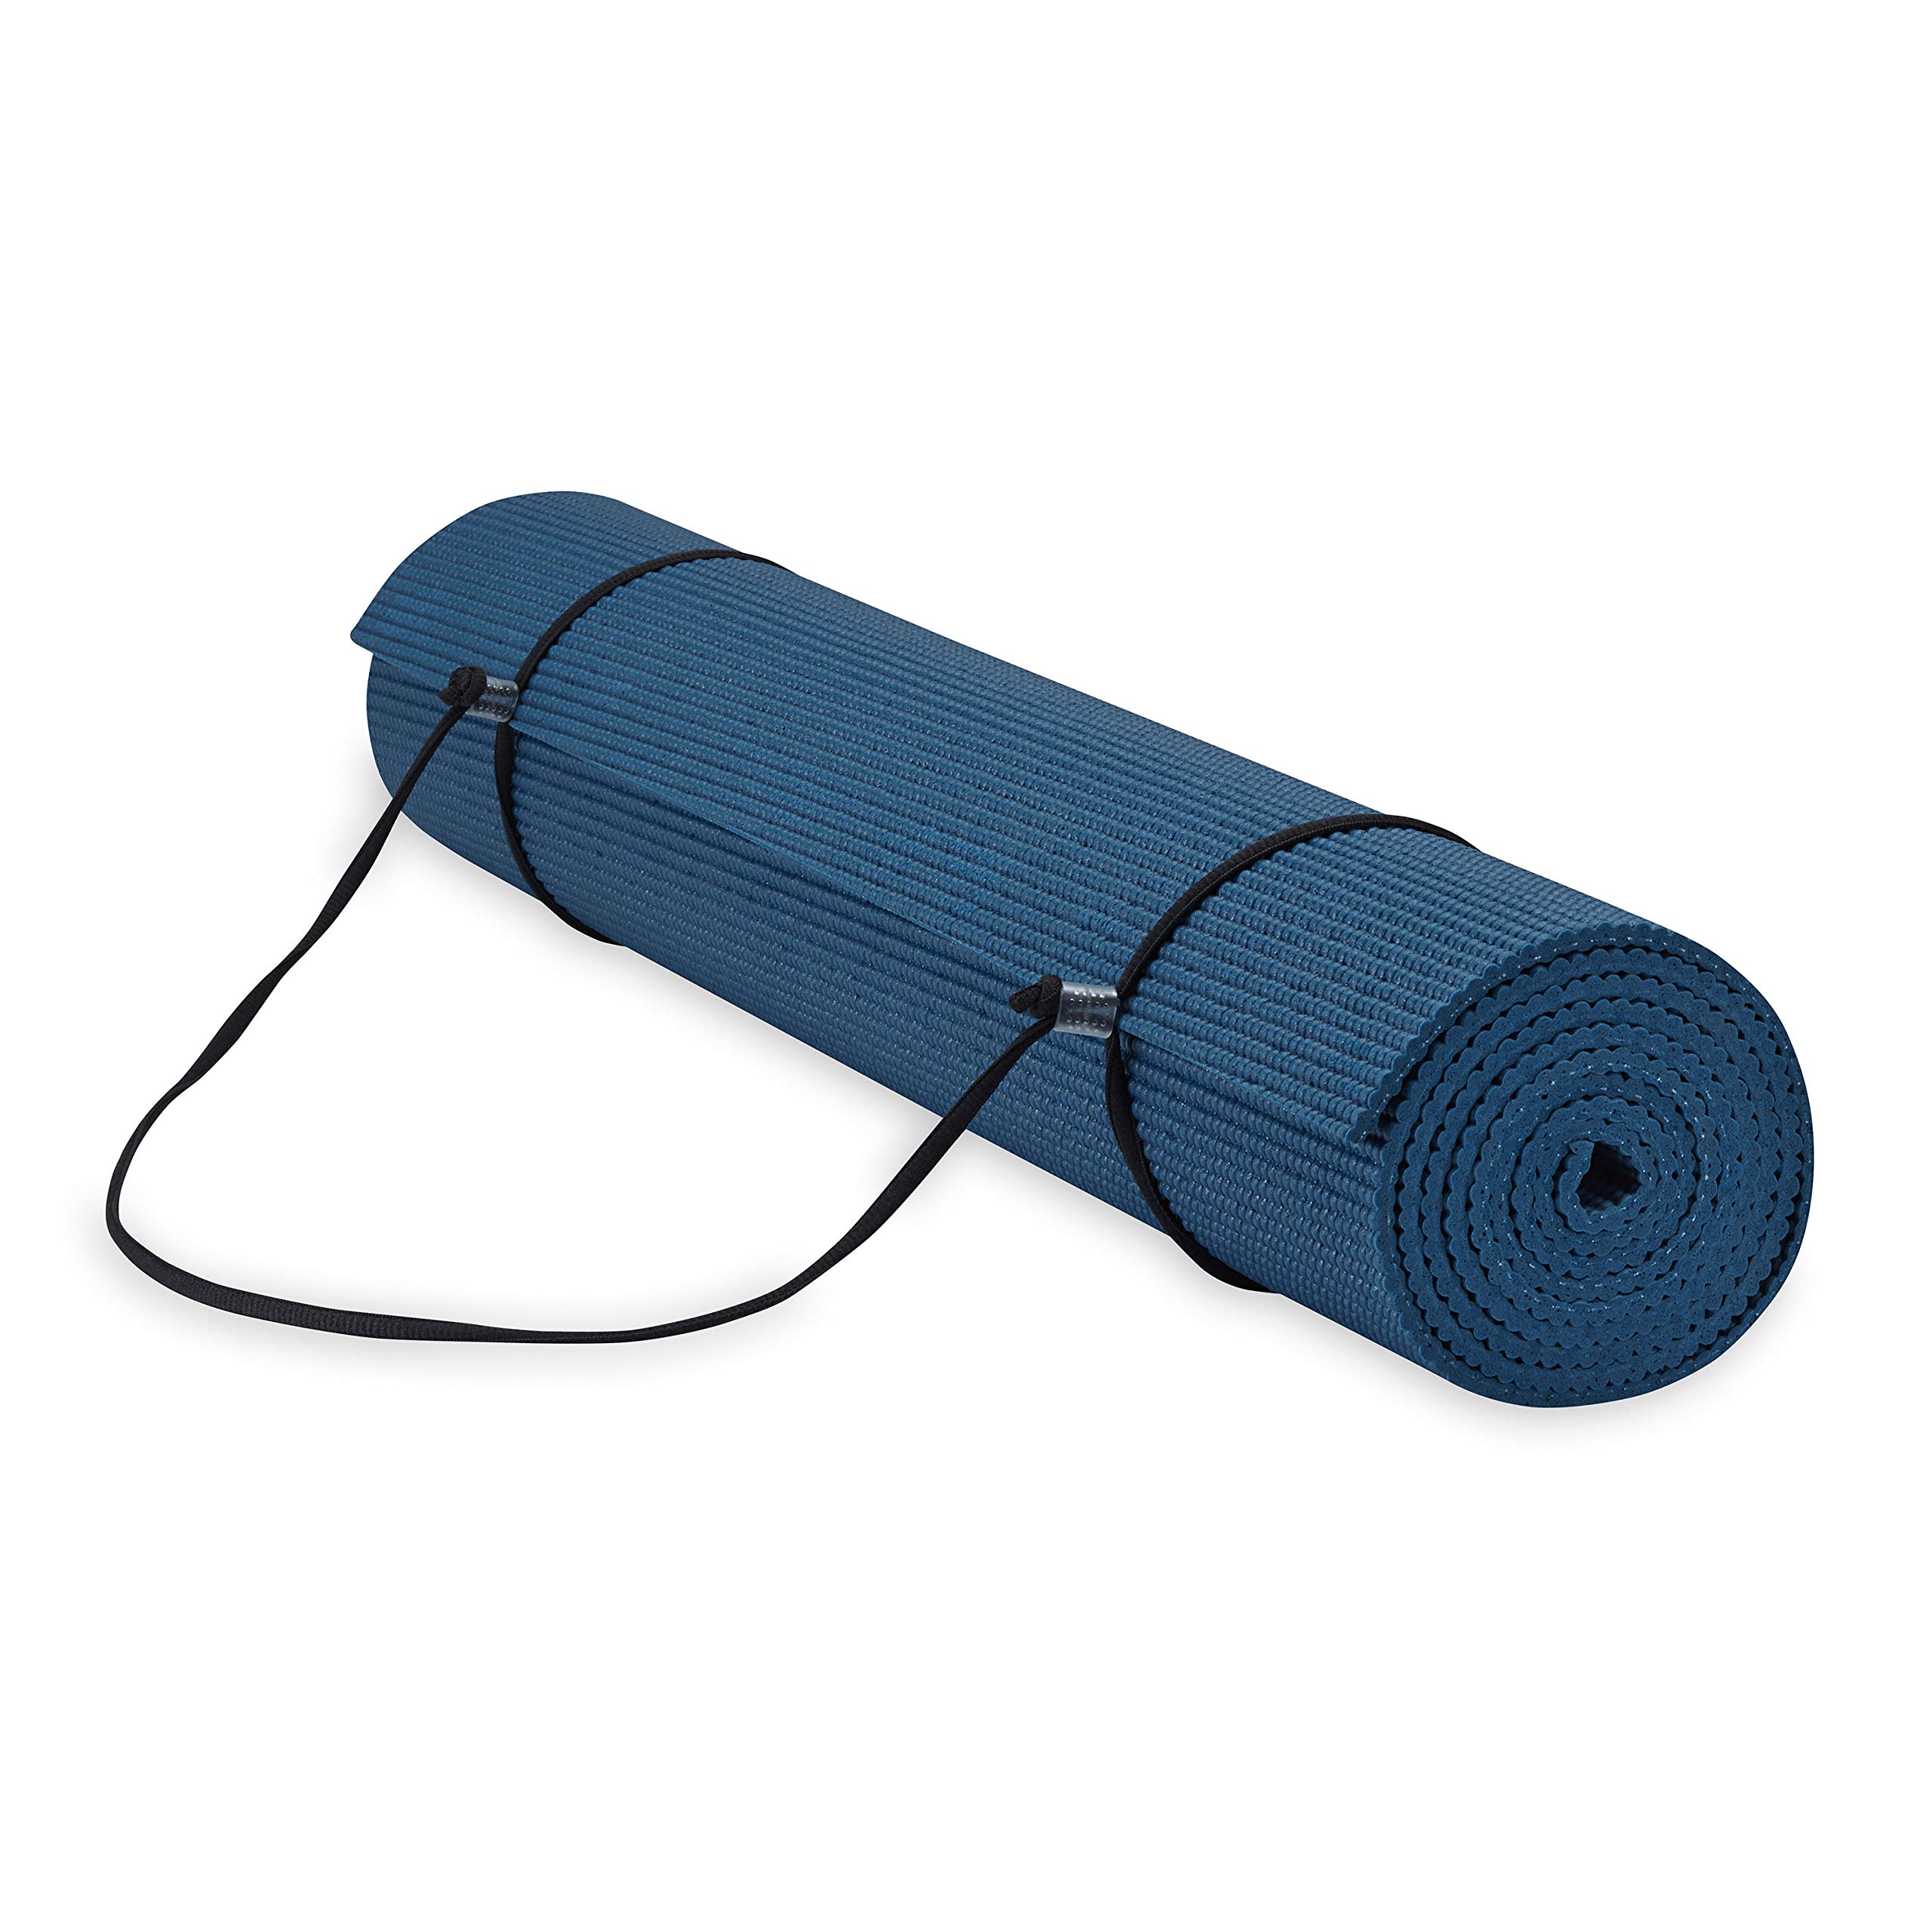 Gaiam Essentials Premium Yoga Mat with Yoga Mat Carrier Sling (72L x 24W  x 1/4 Inch Thick) Navy